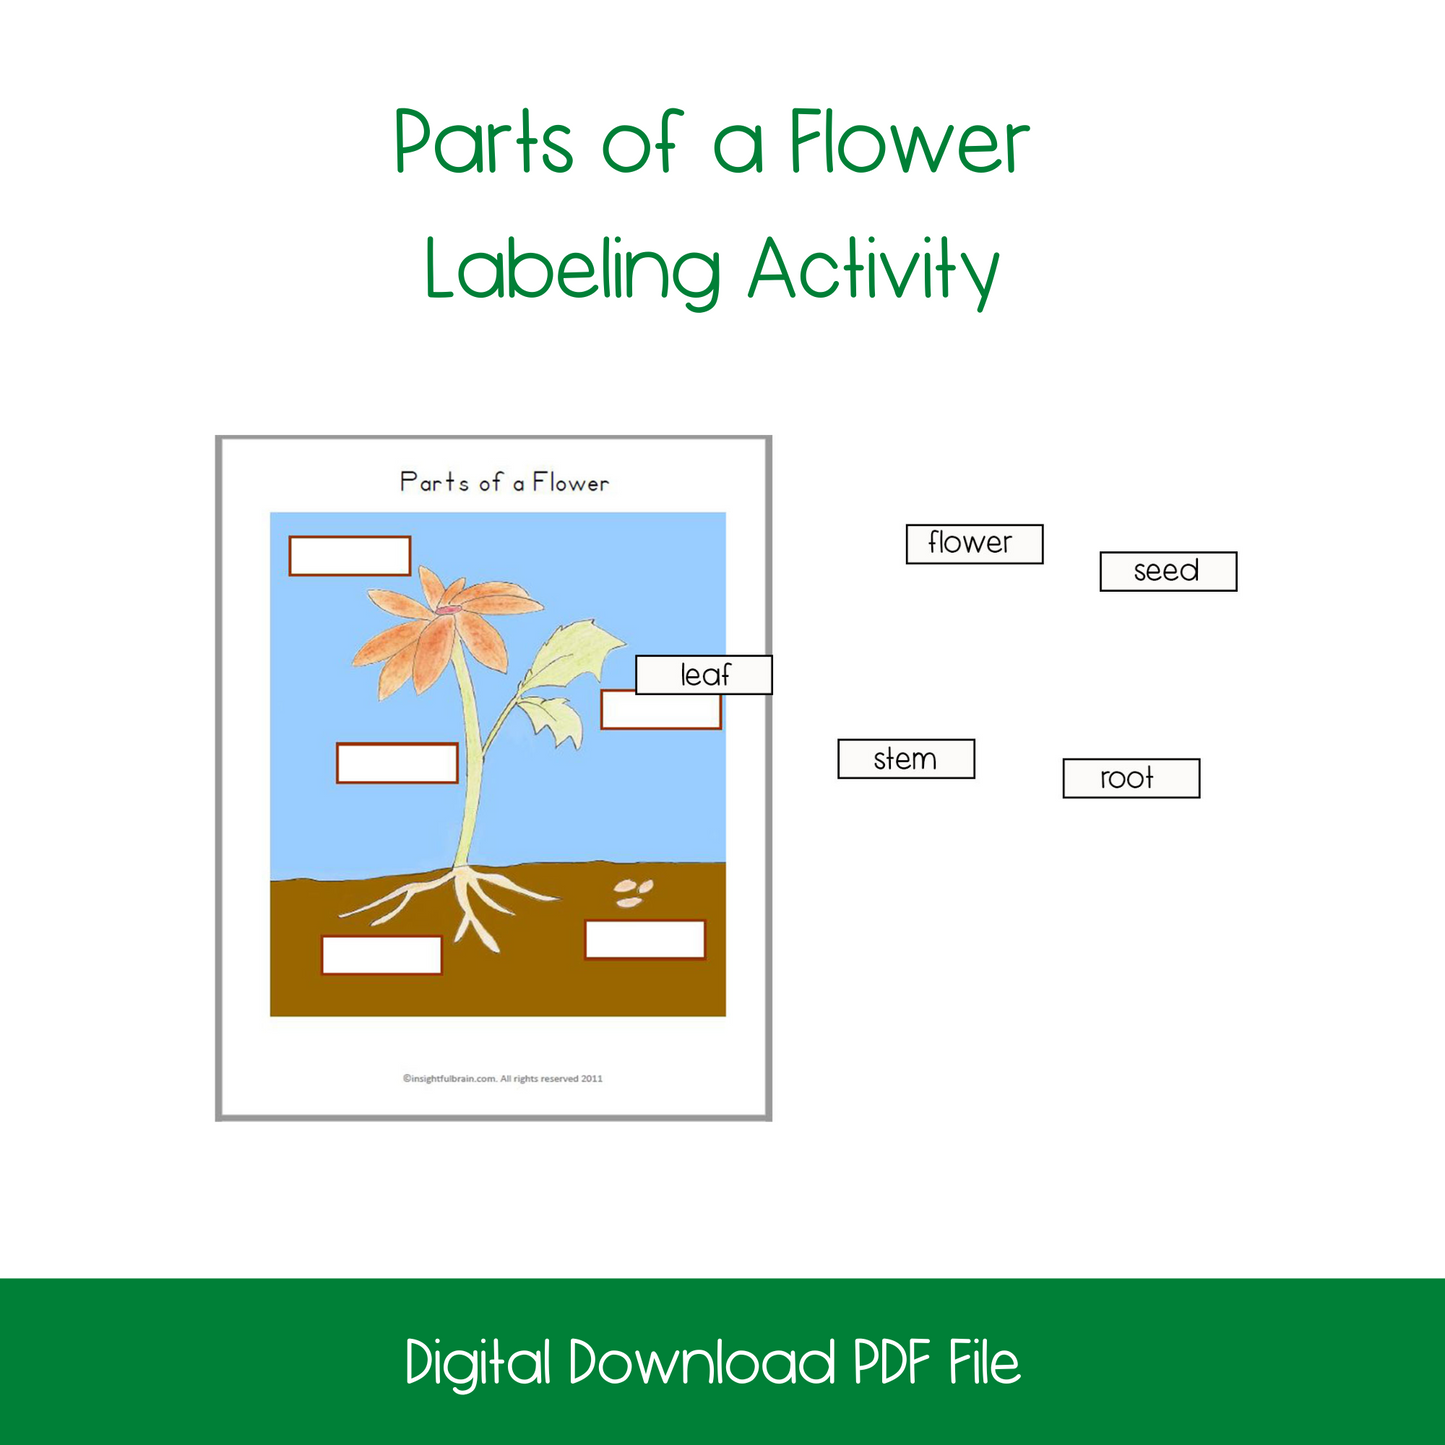 Parts of a Flower Labeling Activity